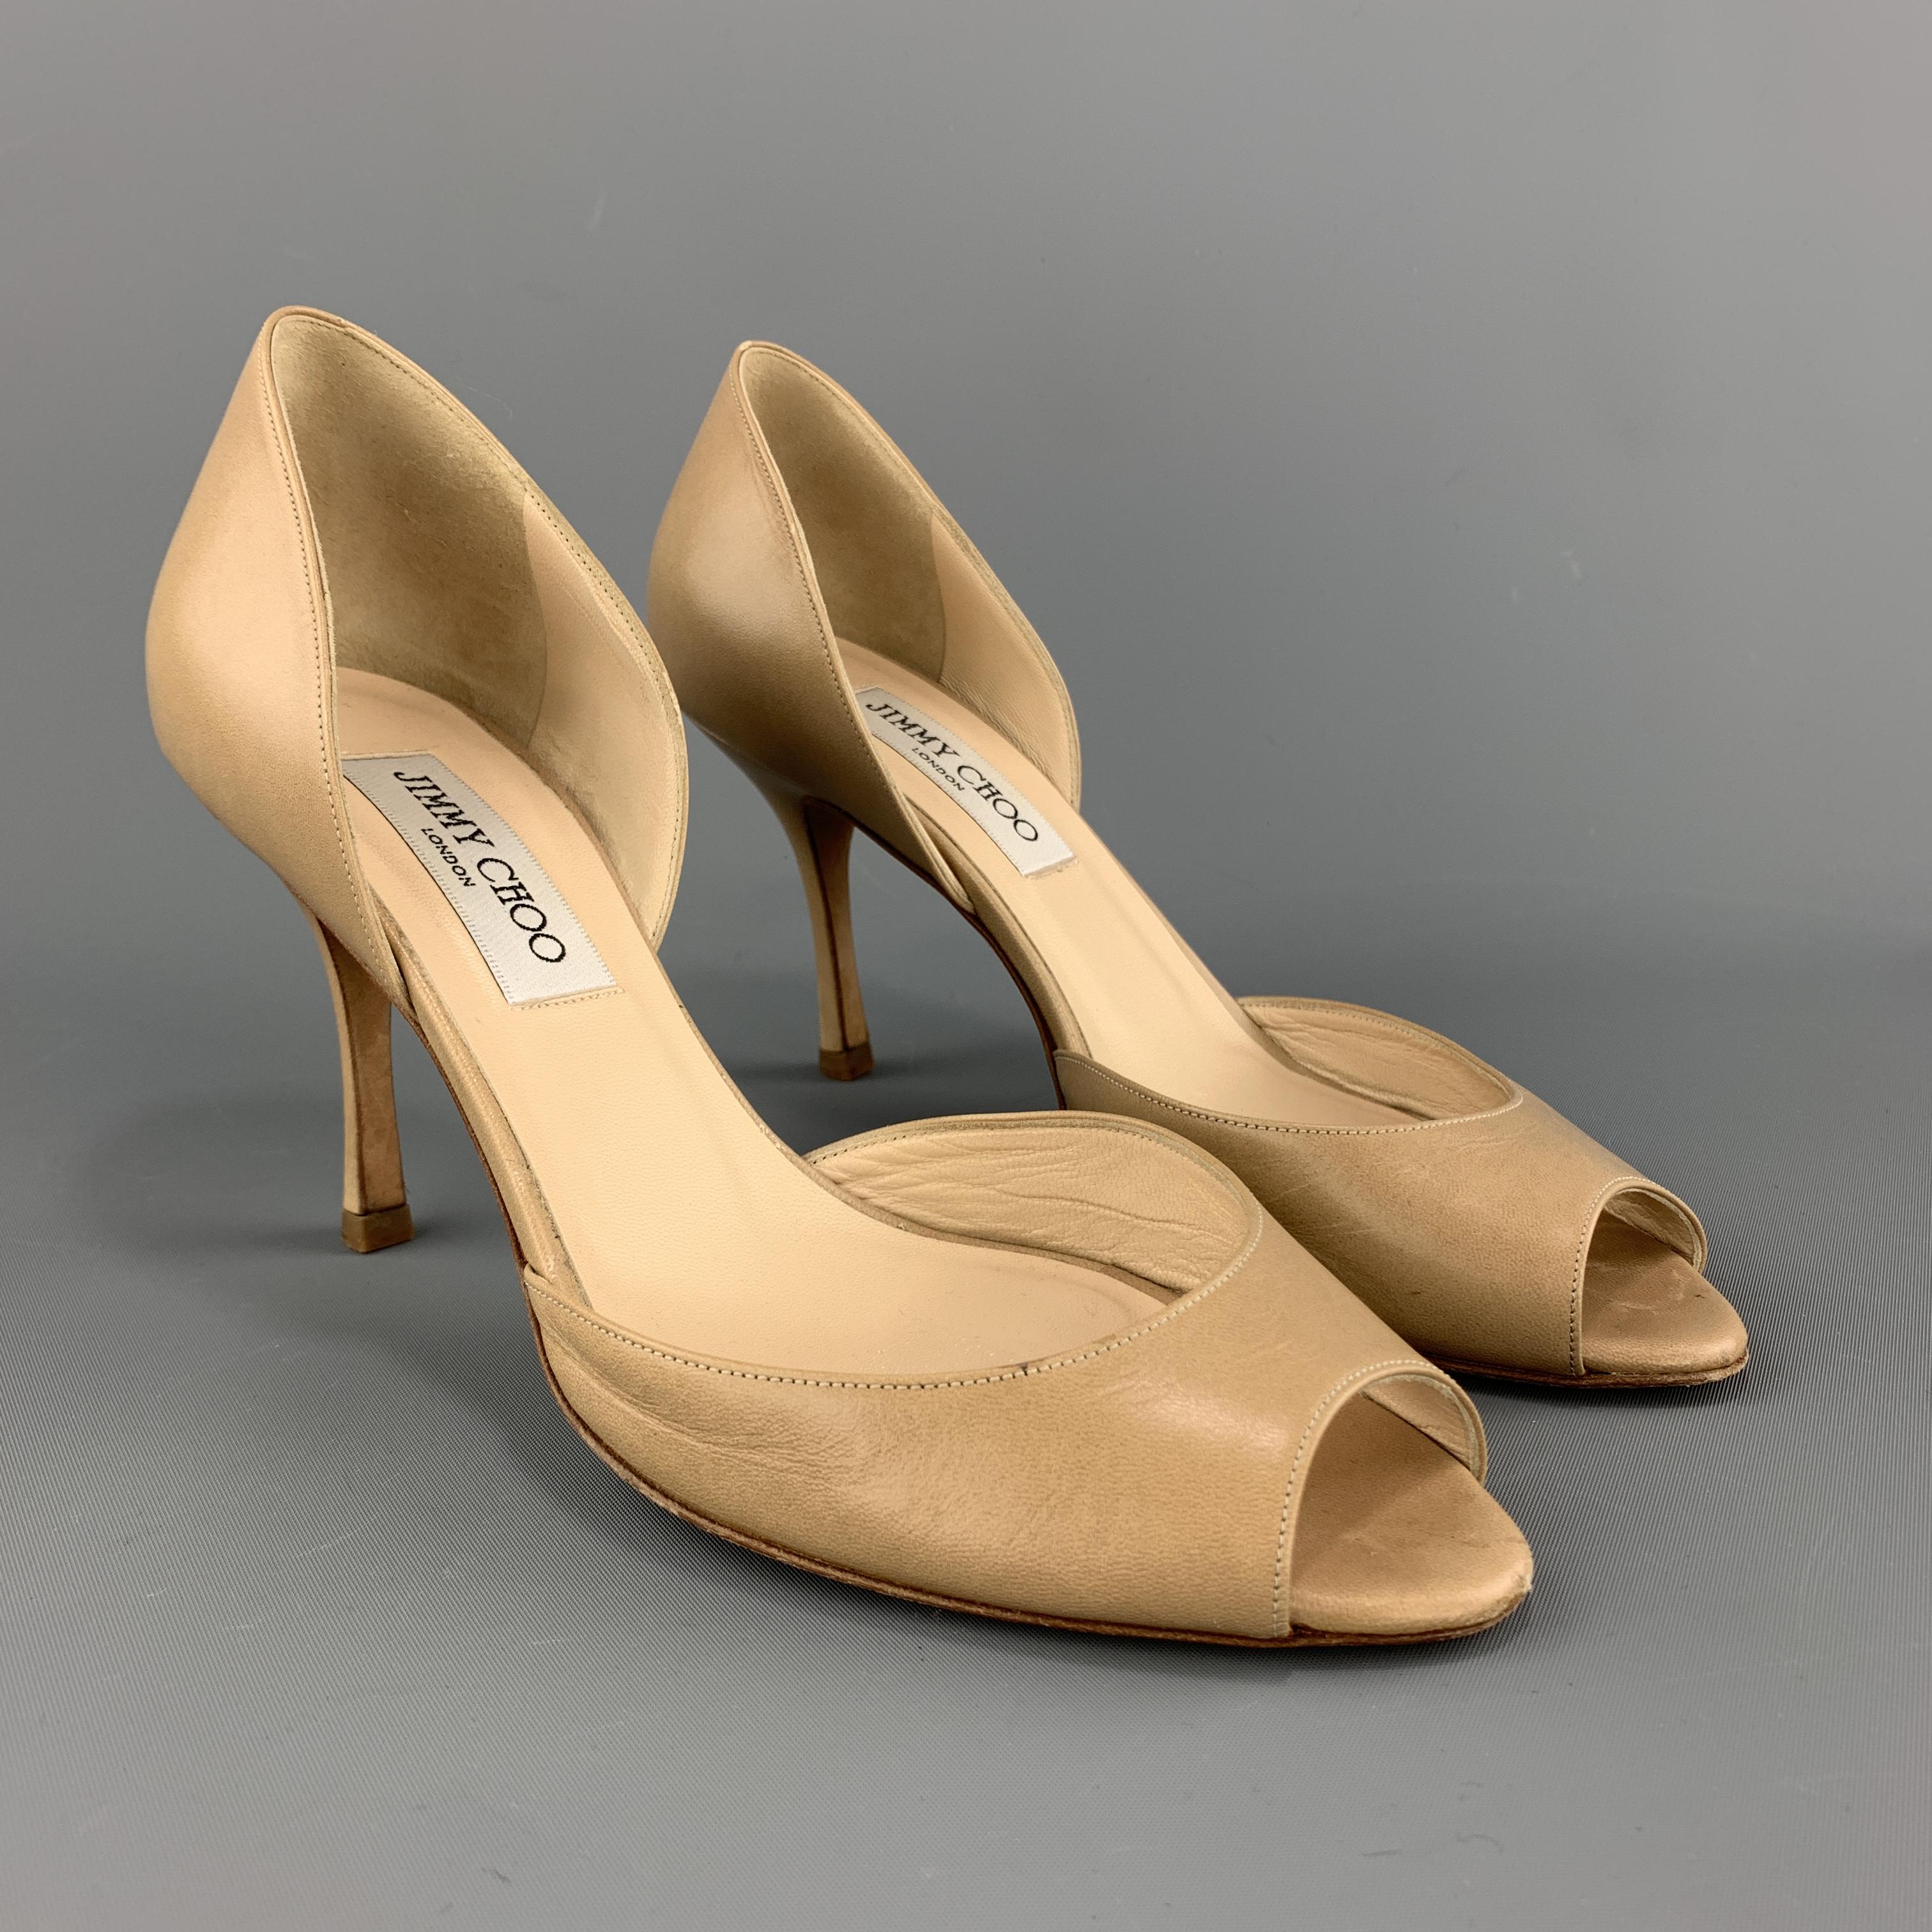 JIMMY CHOO D'orsay pumps come in beige leather smooth leather with a peep toe and covered stiletto heel. Made in Italy.

Very Good Pre-Owned Condition.
Marked: IT 37.5

Heel: 3.5 in.